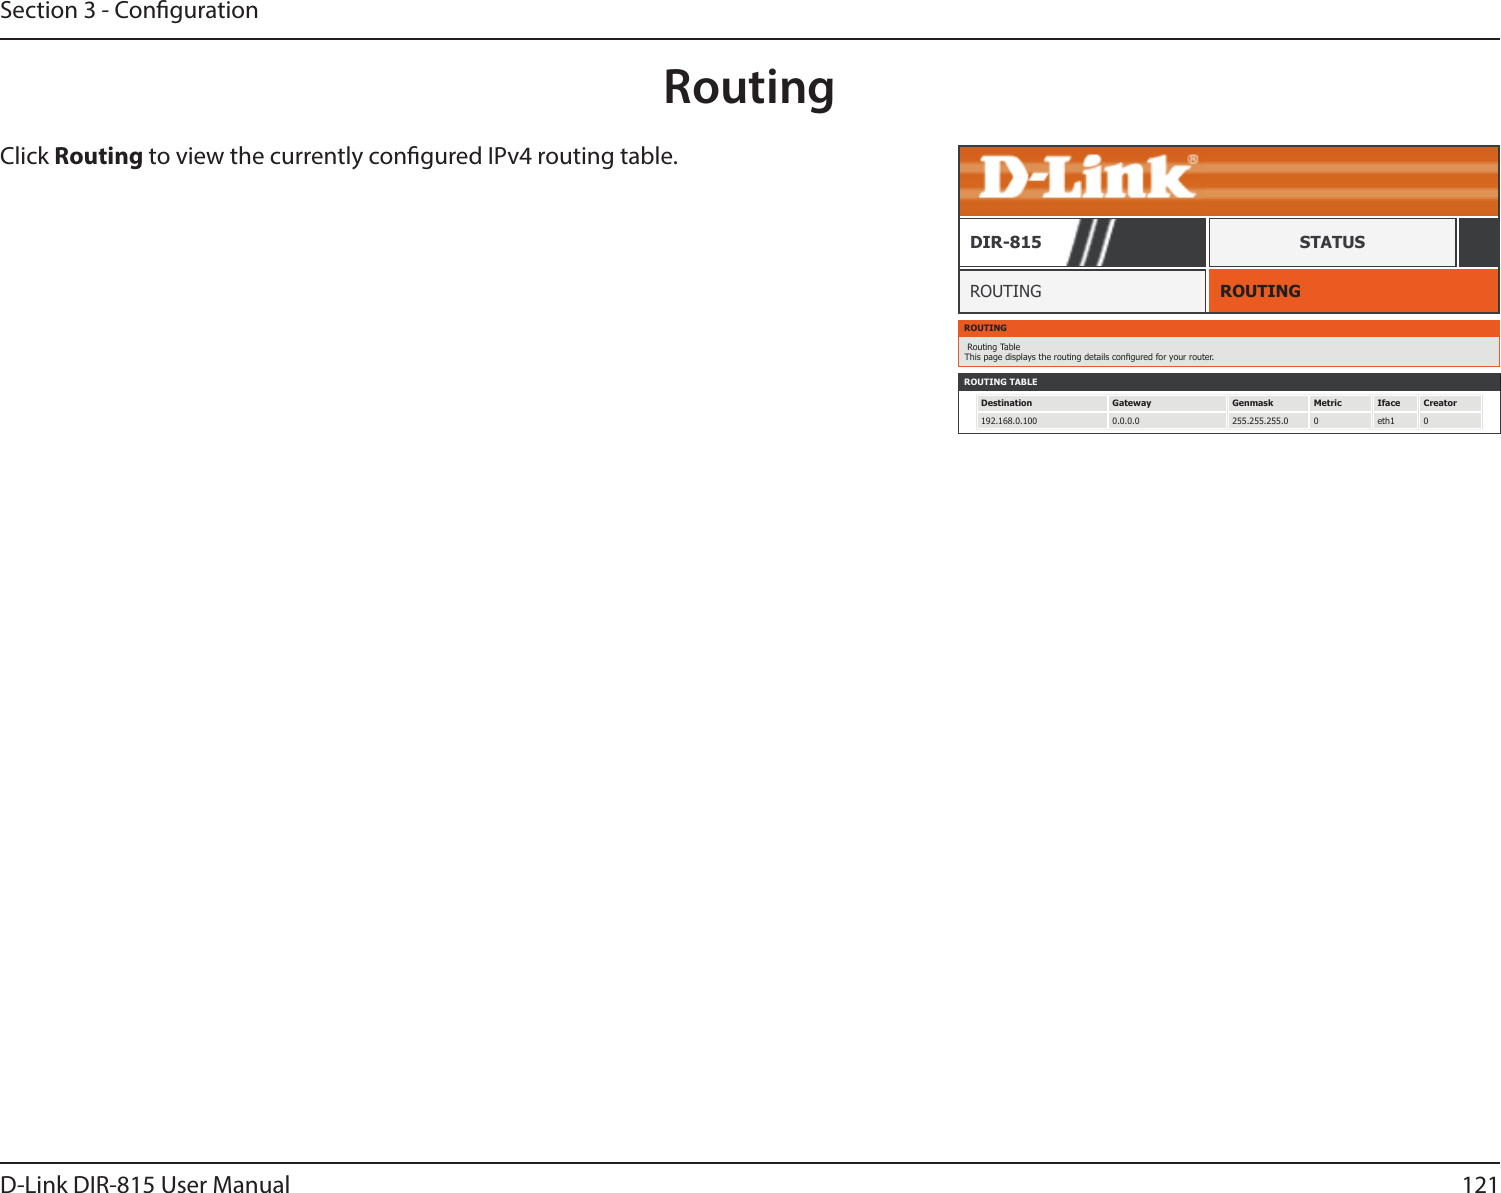 121D-Link DIR-815 User ManualSection 3 - CongurationRoutingROUTINGROUTINGDIR-815 STATUSClick Routing to view the currently congured IPv4 routing table.ROUTING Routing Table This page displays the routing details congured for your router.ROUTING TABLEDestination Gateway Genmask Metric Iface Creator192.168.0.100 0.0.0.0 255.255.255.0 0 eth1 0